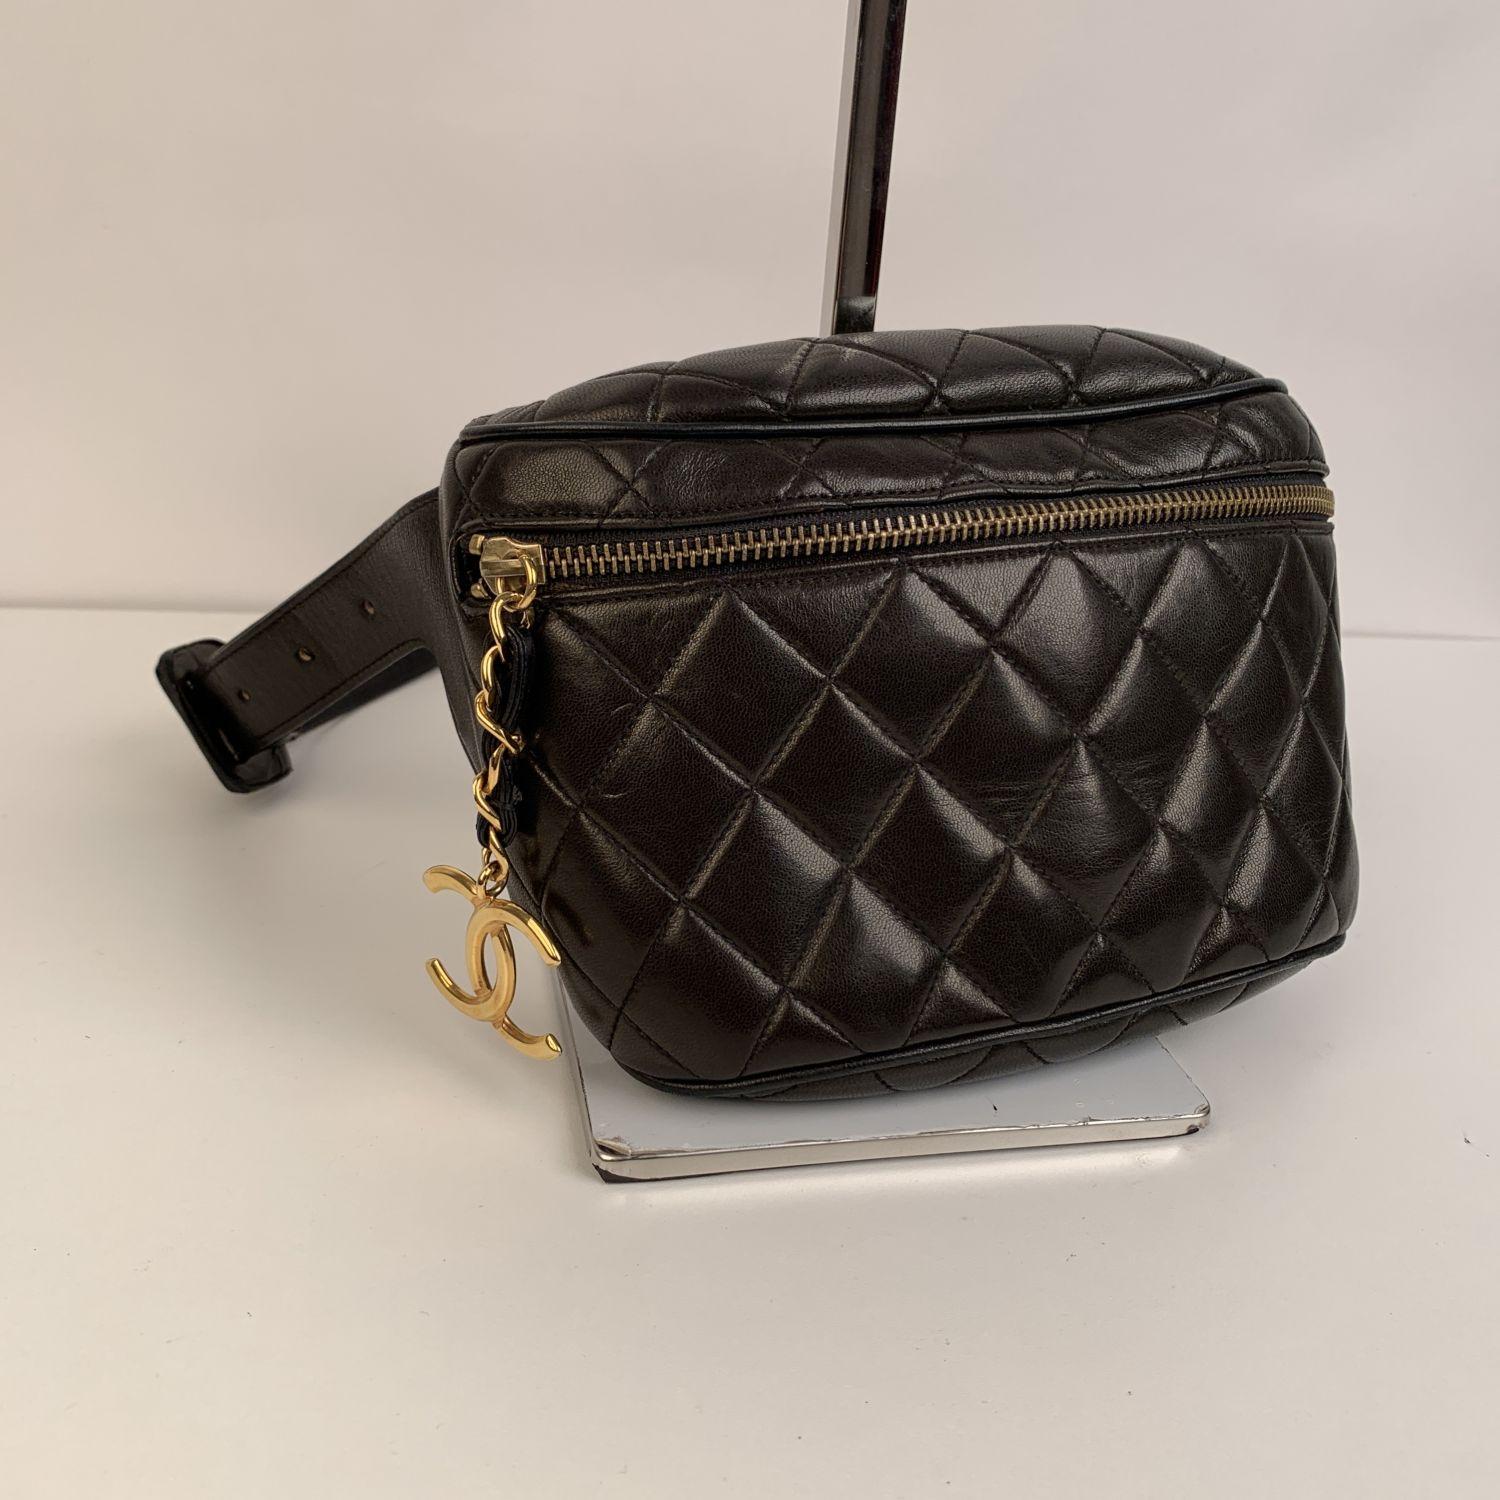 This bag will come with a Certificate of Authenticity provided by Entrupy, at no further cost.

- Chanel black quilted leather bum bag
- Period/Era: pre-1986
- Adjustable belt
- Front zip closure with gold metal CC - CHANEL logo zipper pull
- Black